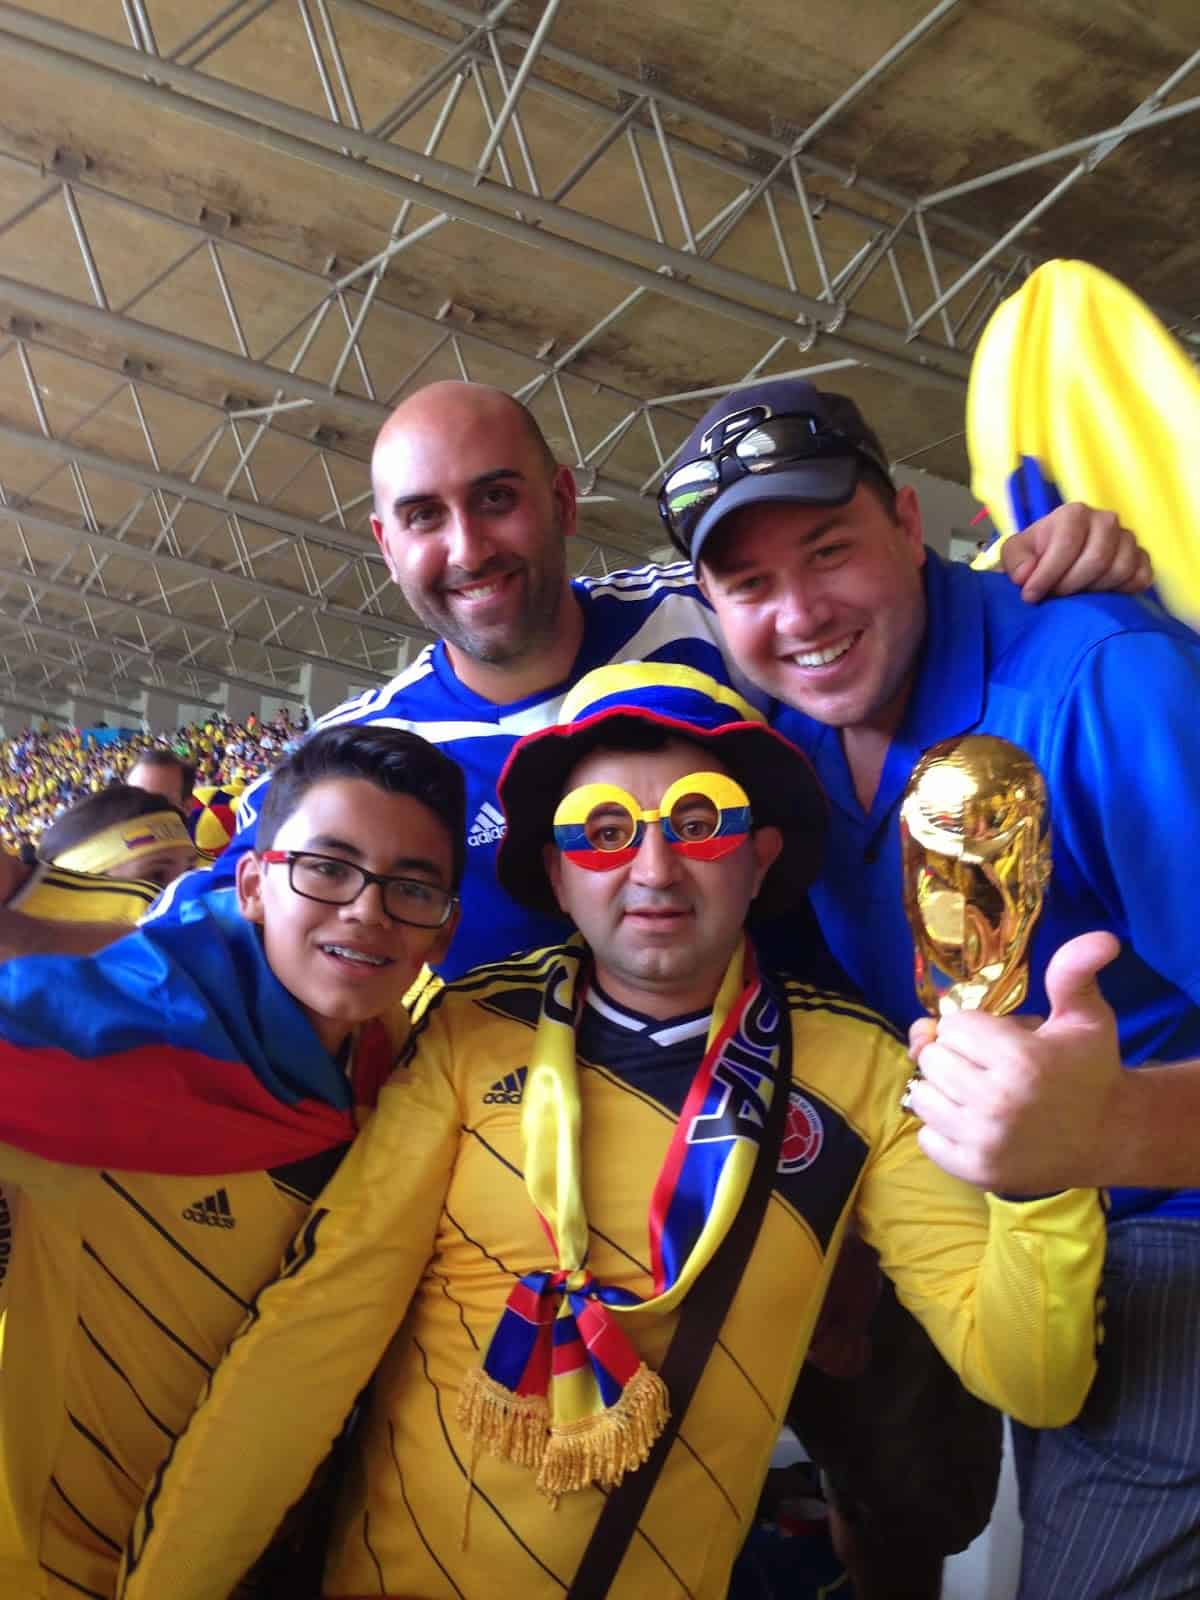 With some fans after the game 2014 World Cup at Estádio Mineirão in Belo Horizonte, Brazil